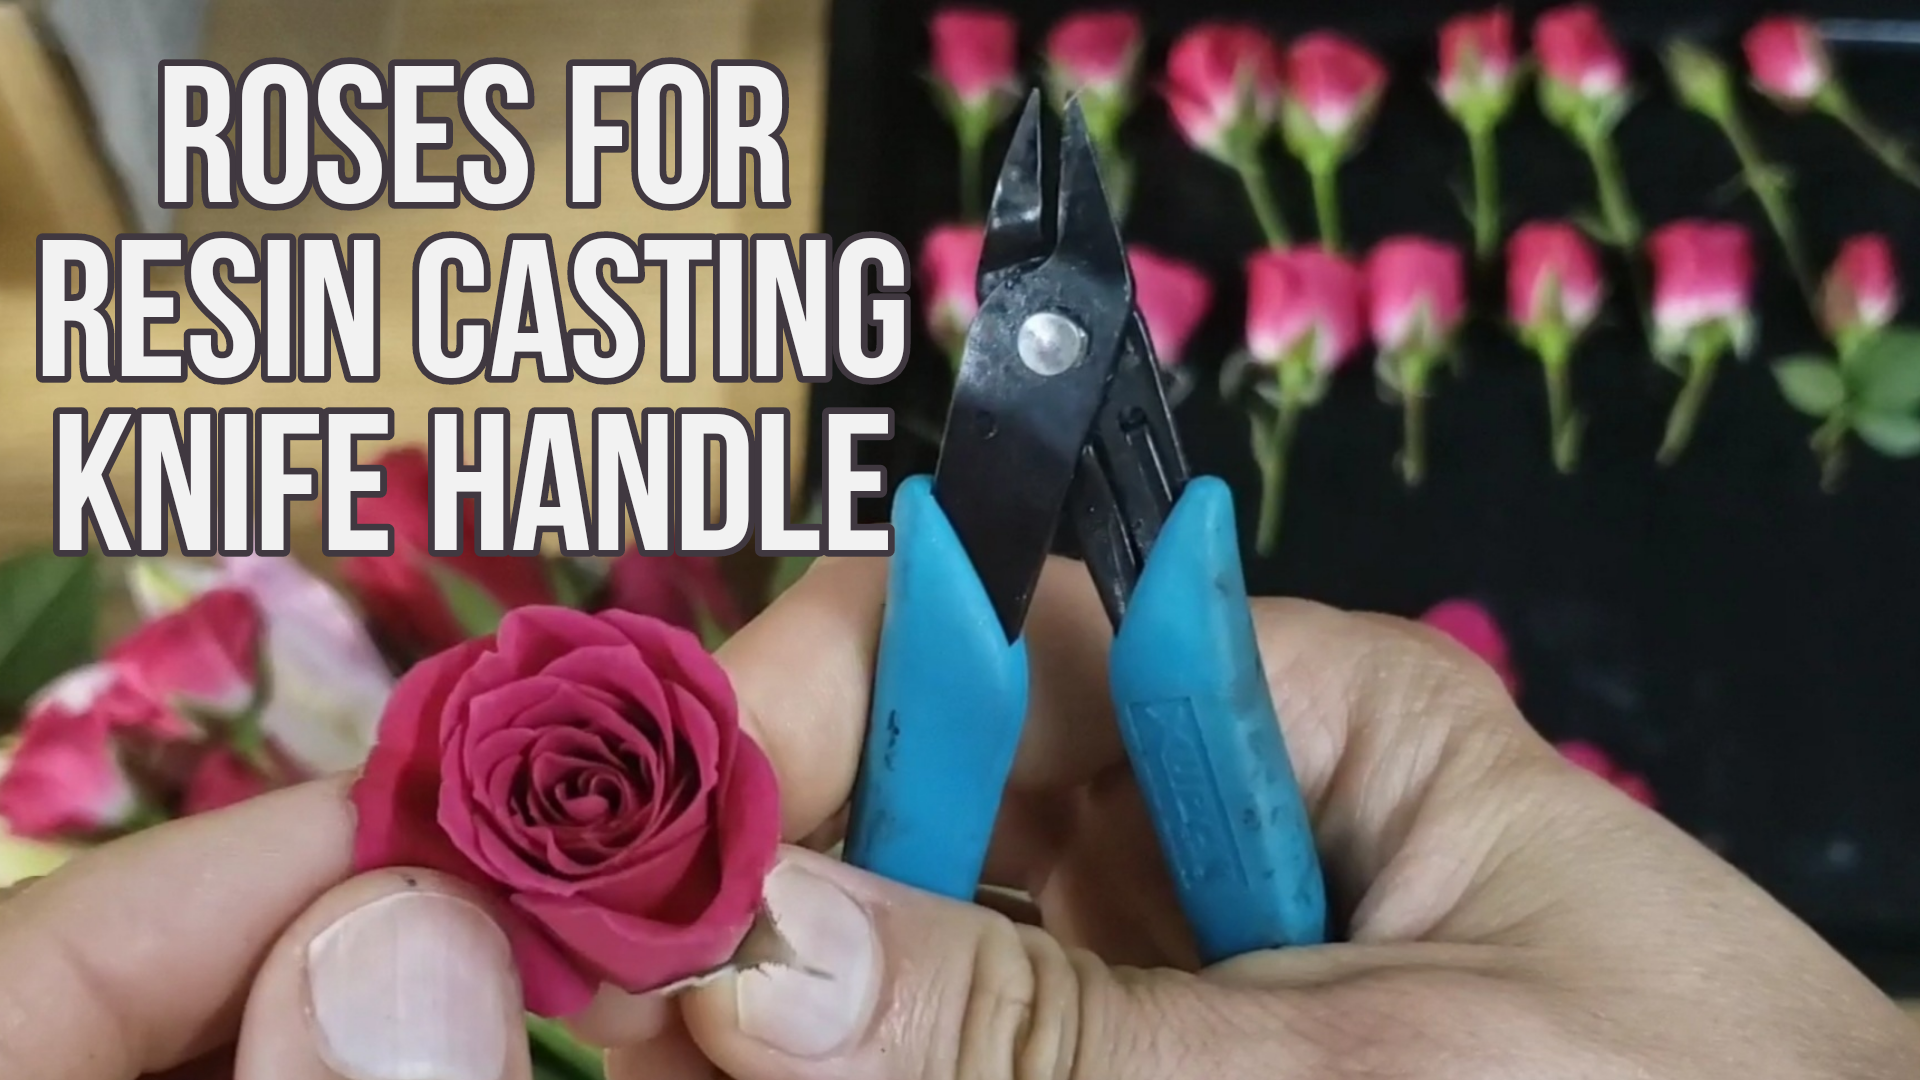 How To Select, Prep and Dry Roses To Be Incased In Cast Resin Knife Handles | SOUL BUILT KRVR Knives